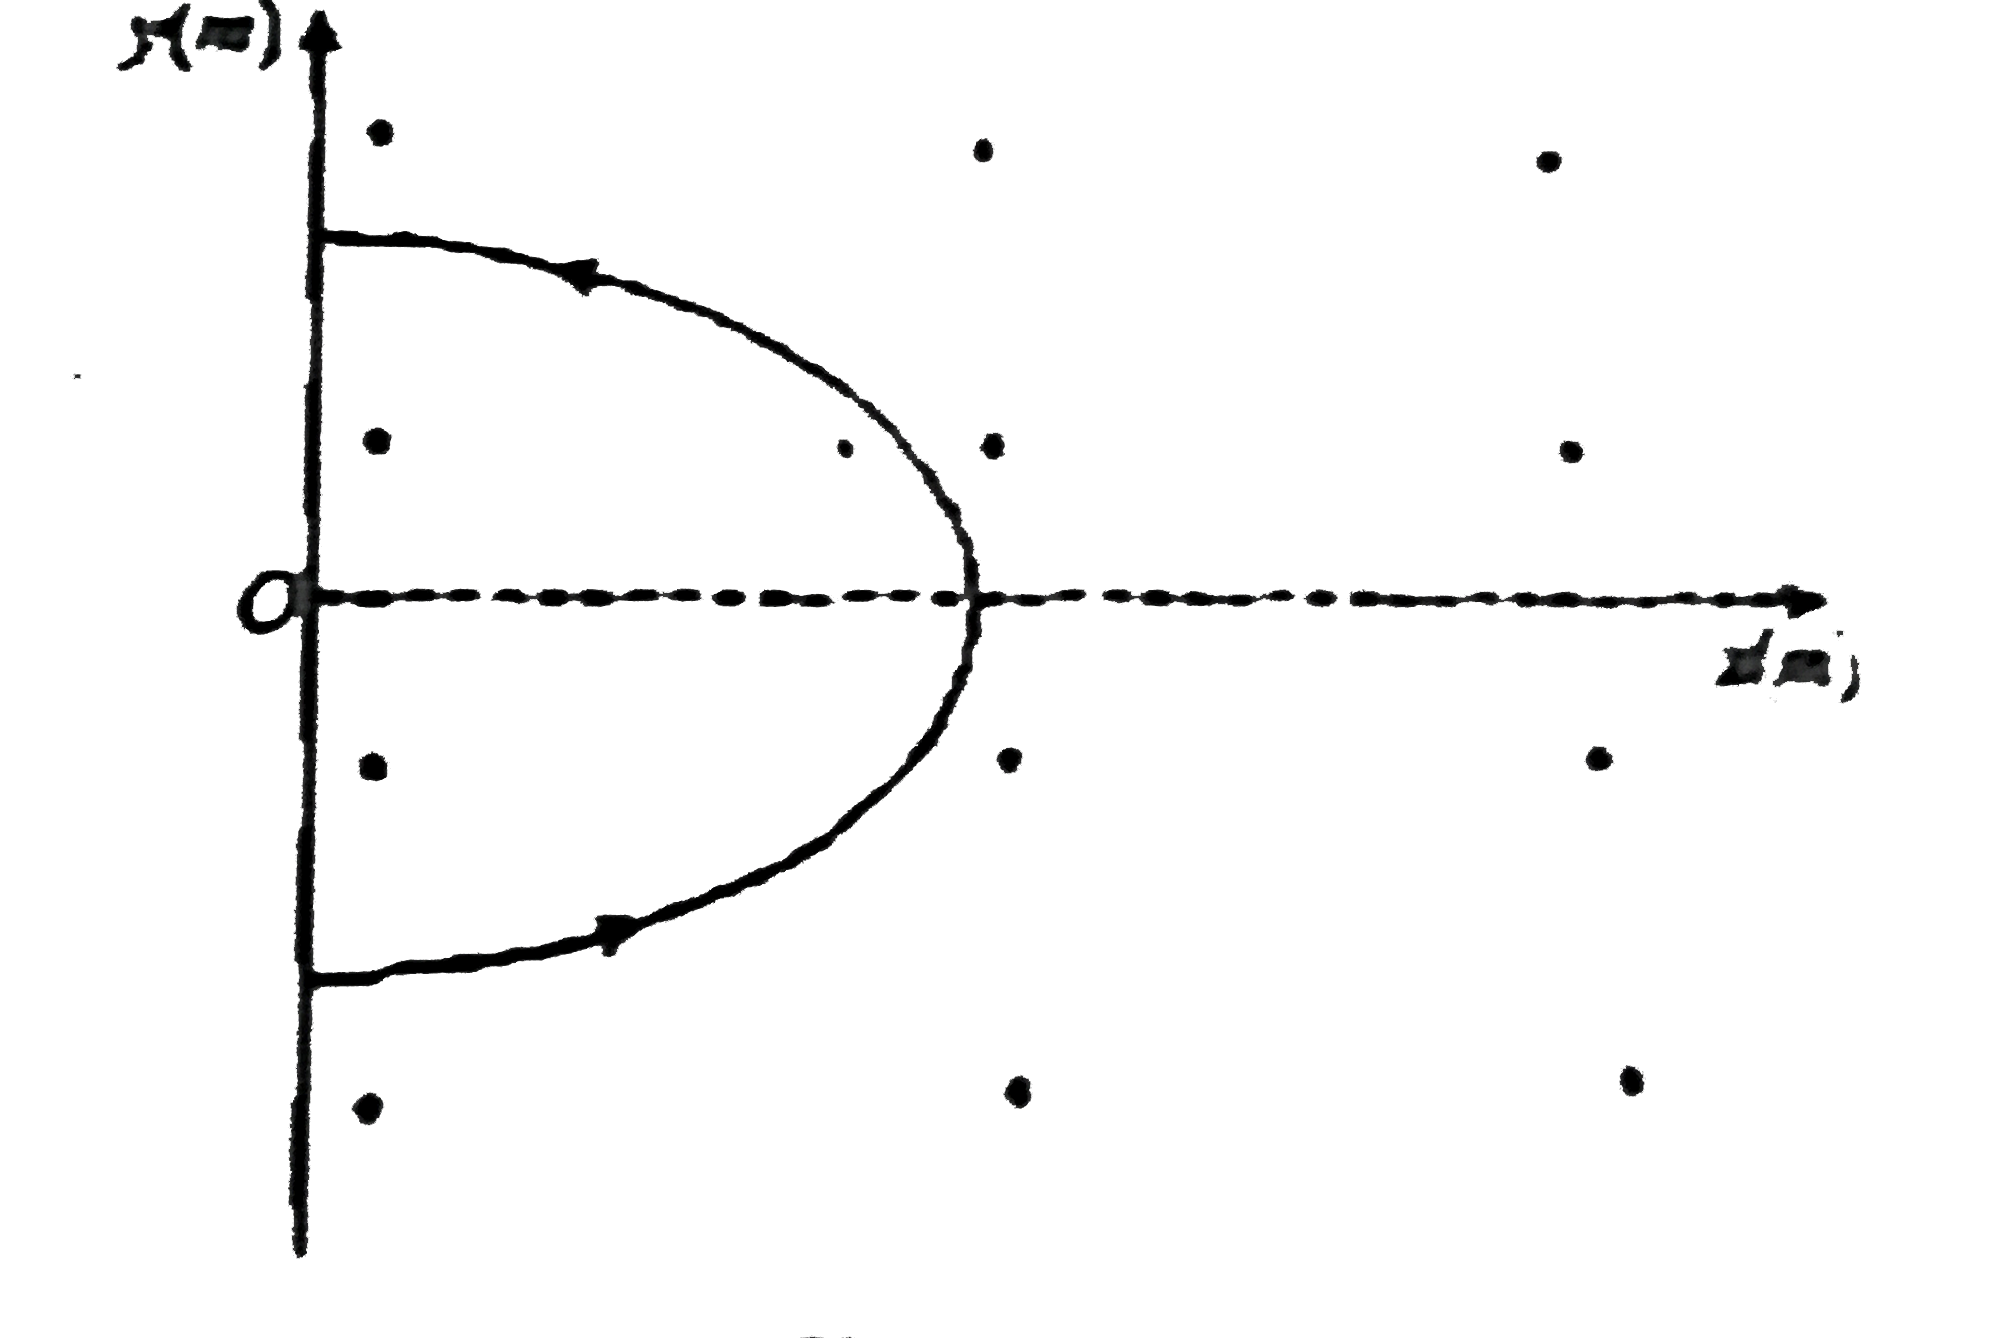 A wire carrying a current of 3A is bent in the form of a parabola y^(2)=4-x as shown in figure-4.226, where x and y are in metre. The wire is placed in a uniform magnetic field vecB=5hatkT. The force acting on the wire is: